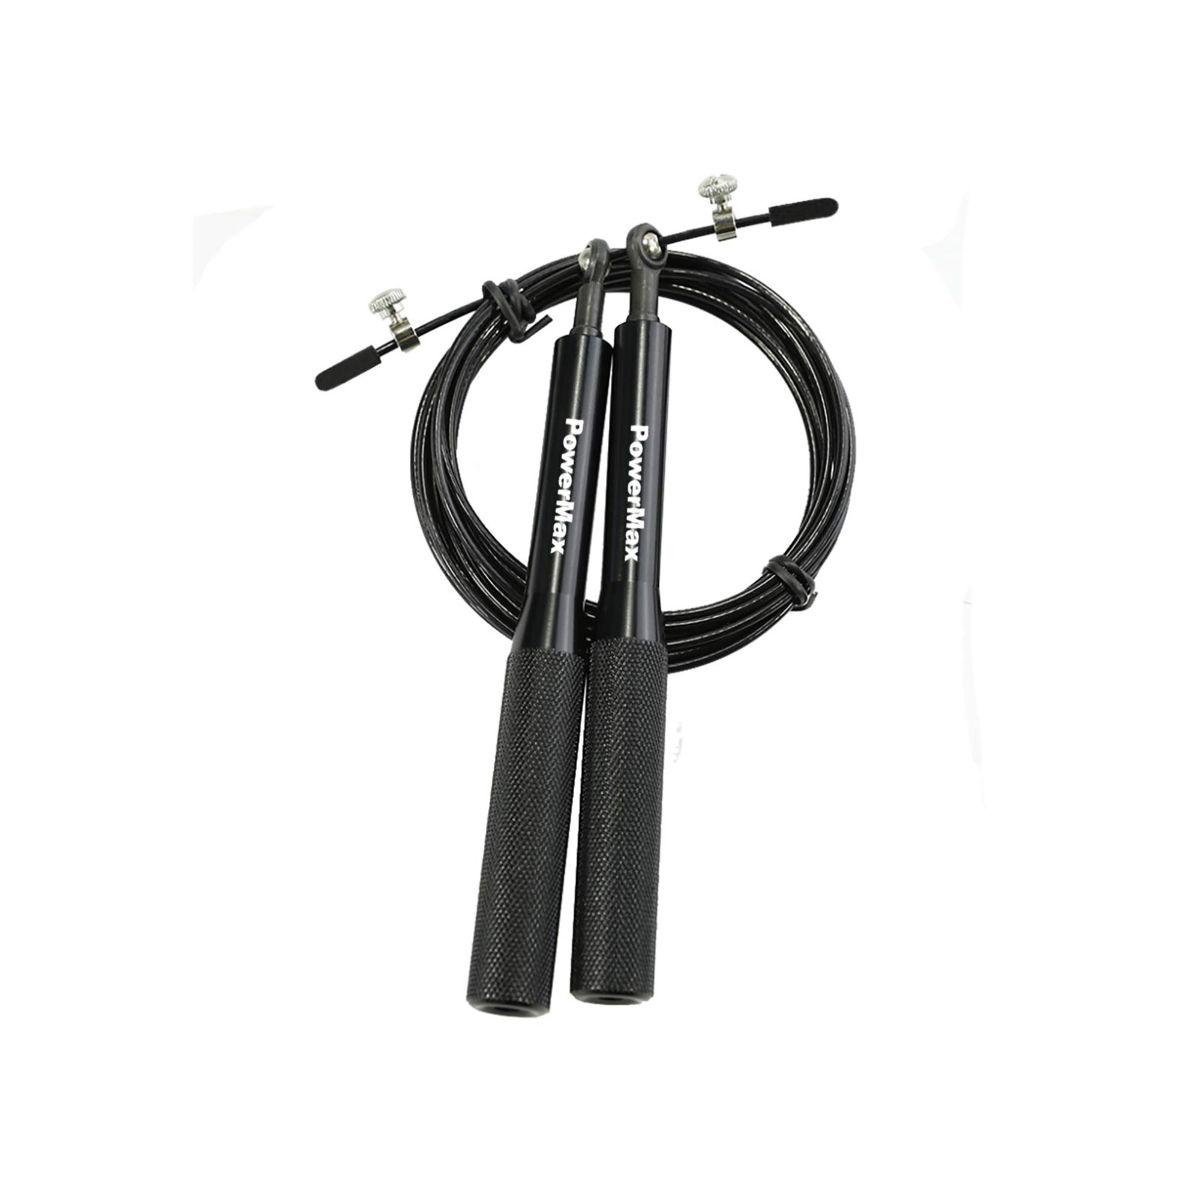 PowerMax Fitness JA-3 (Black) Exercise Speed Jump Rope With Adjustable Cable with Anti-Slip Handle